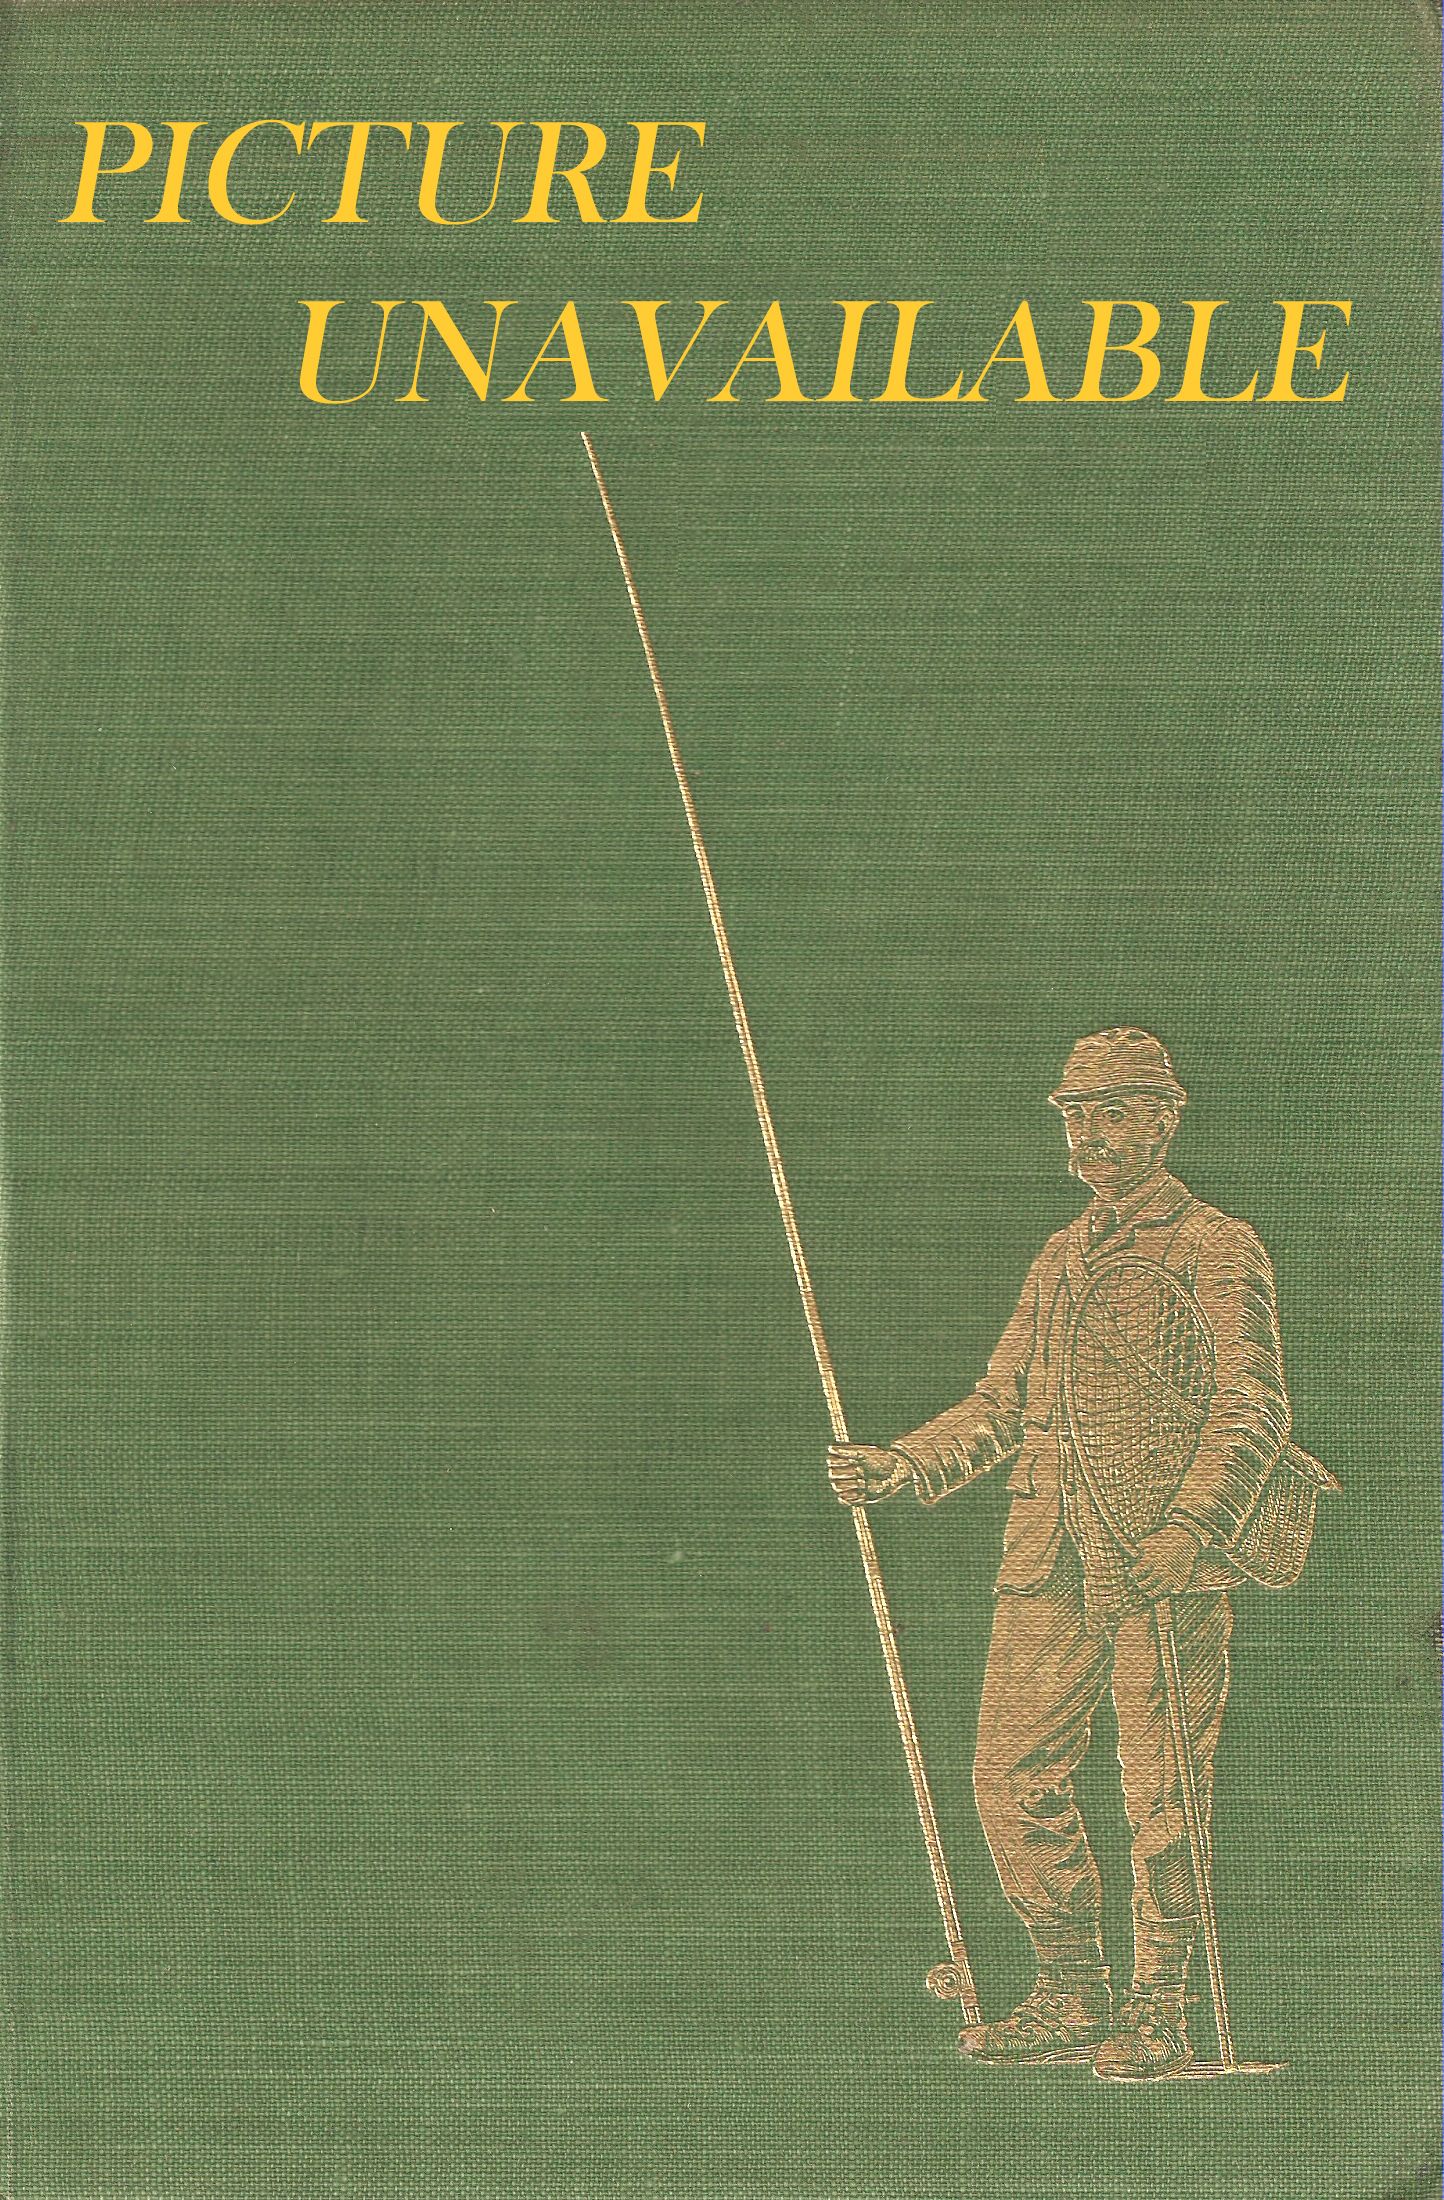 THE KING OF THE POACHERS. By J. Connell. 1983 Tideline Books new hardback  edition of CONFESSIONS OF A POACHER.